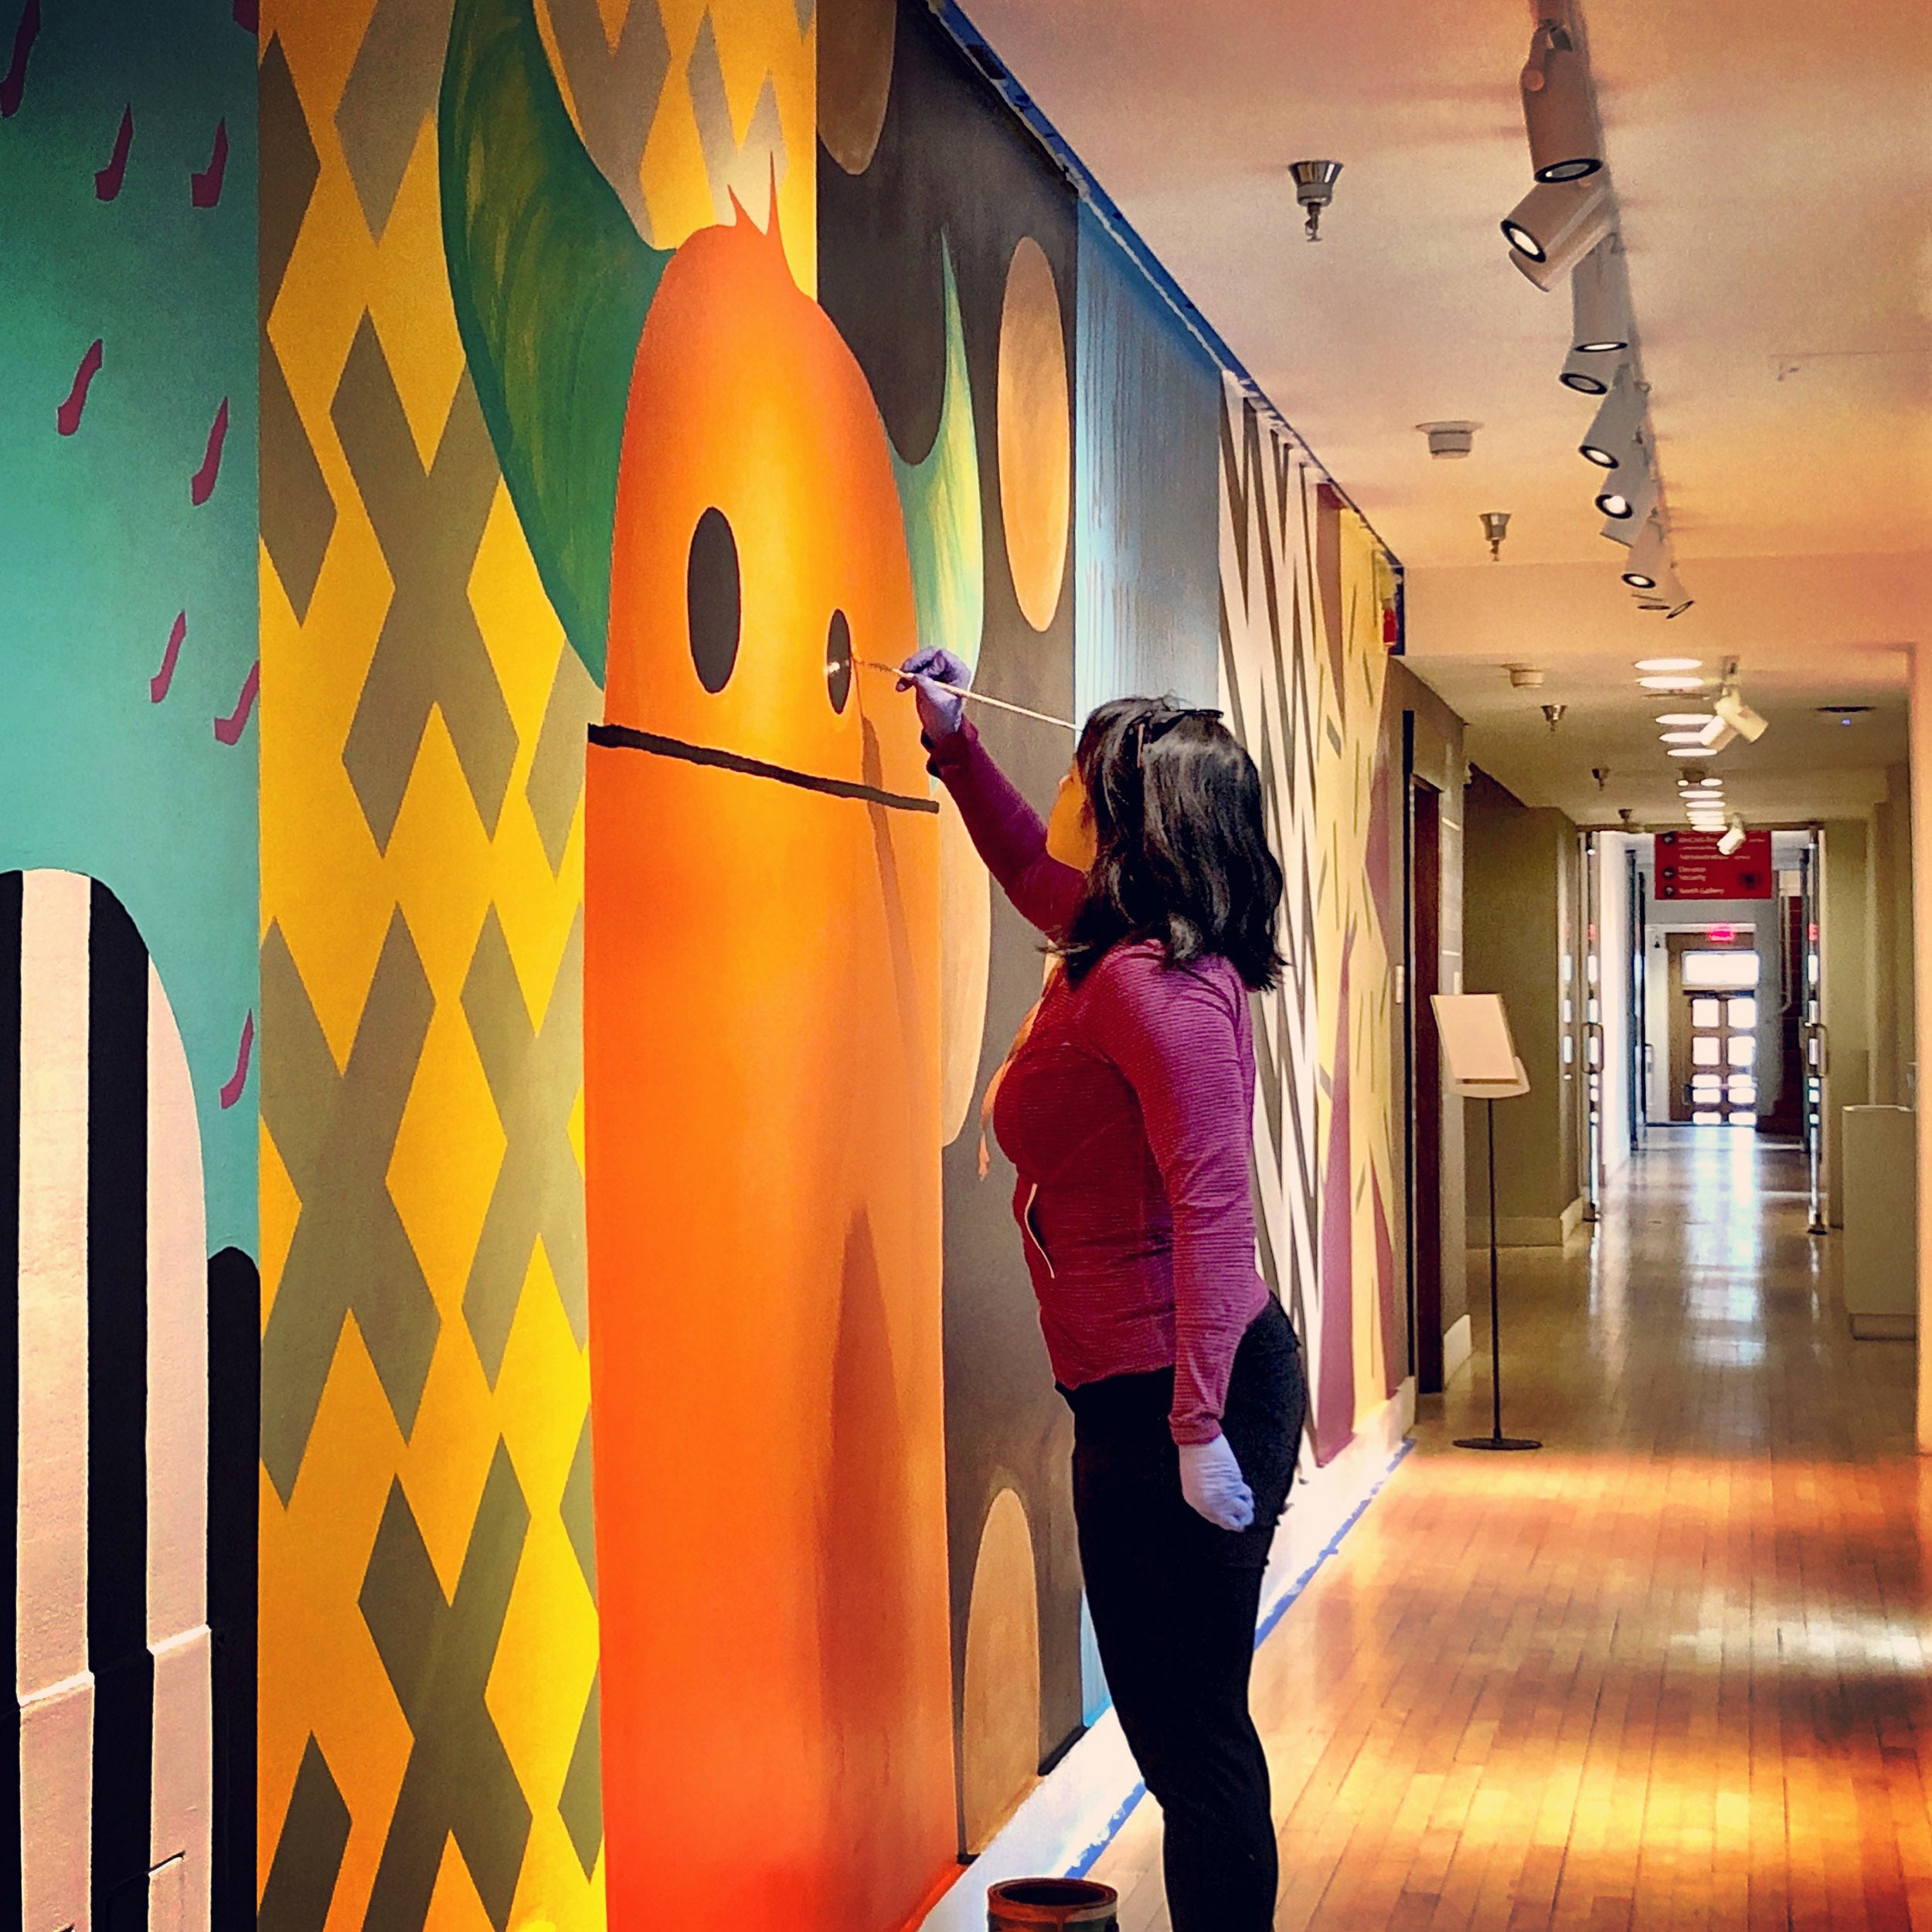 Heidi Brandow paints a mural at the Museum of Contemporary Native Arts in Santa Fe, New Mexico.